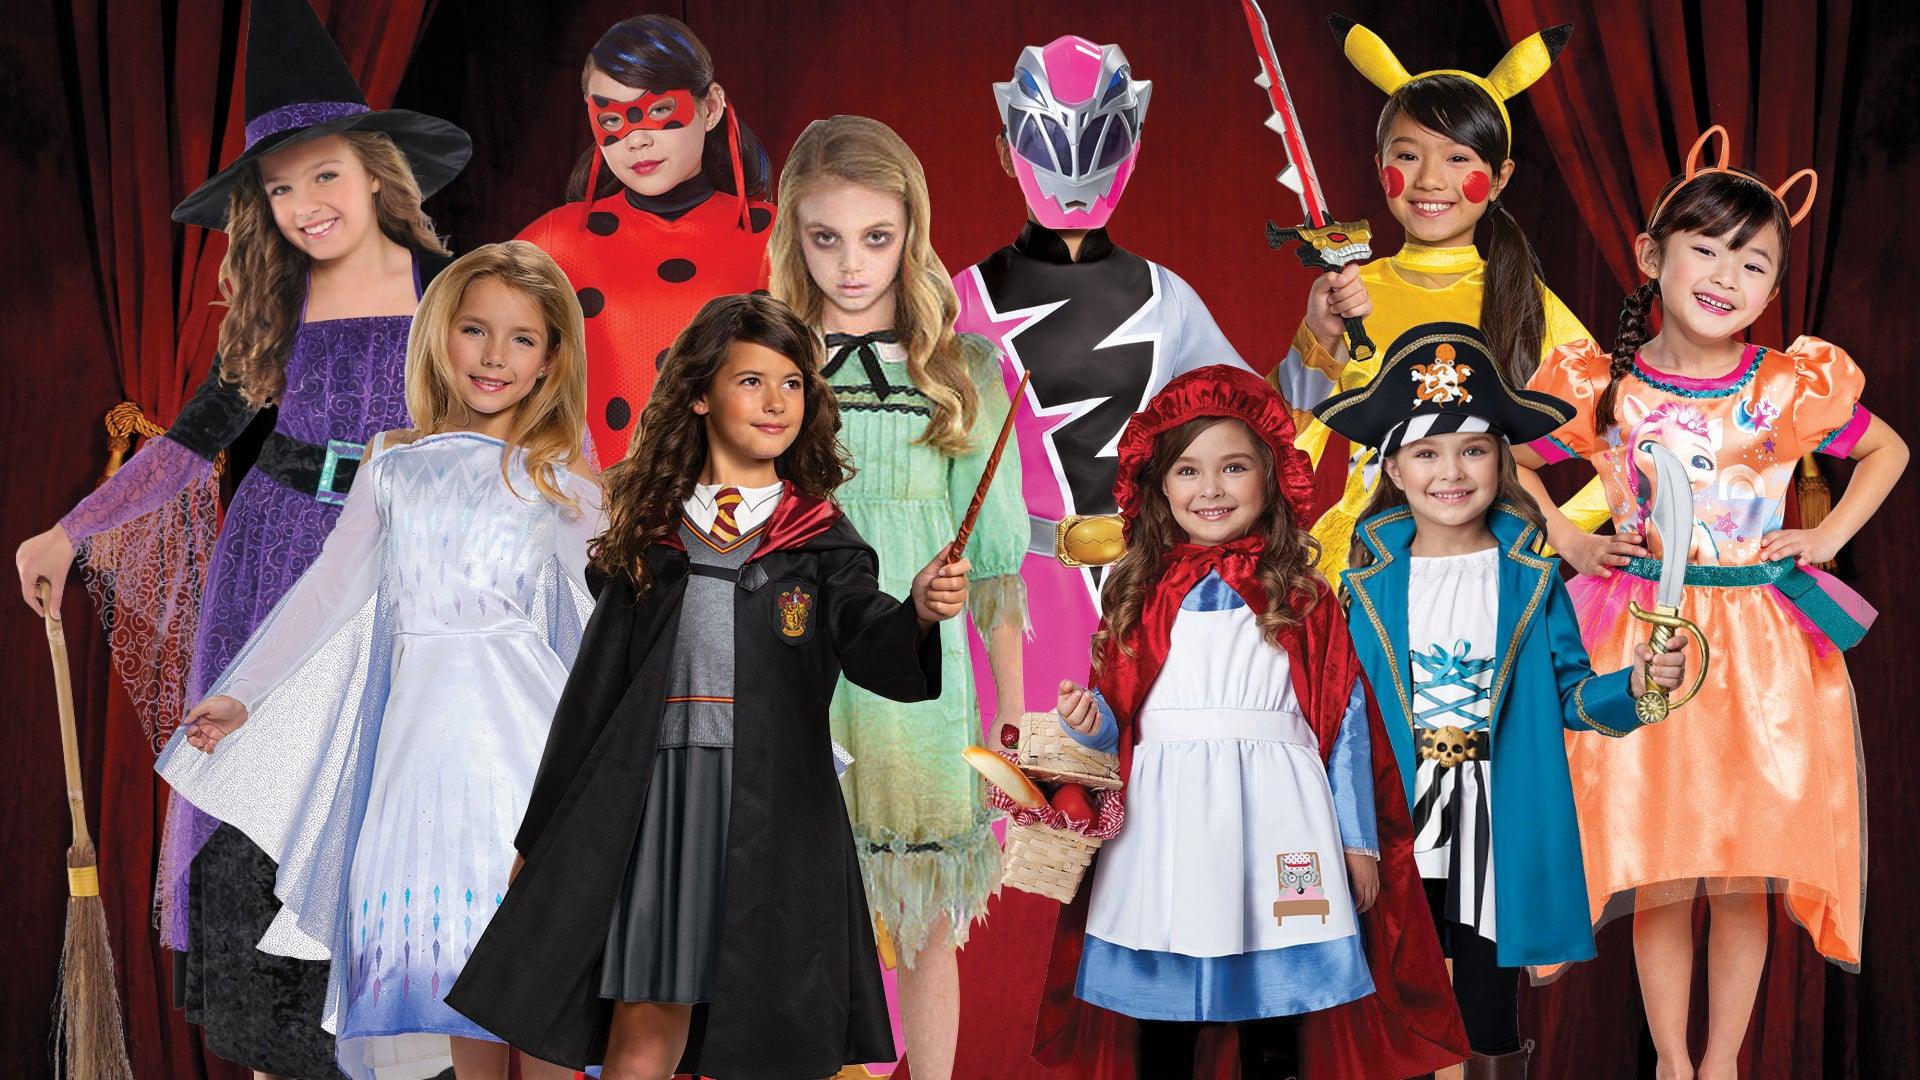 Group Halloween Costumes Women, Outfit for Women, Teen Girl Costumes, Ninja  Female Costume, TV Costume, Plus Size Costume -  Canada